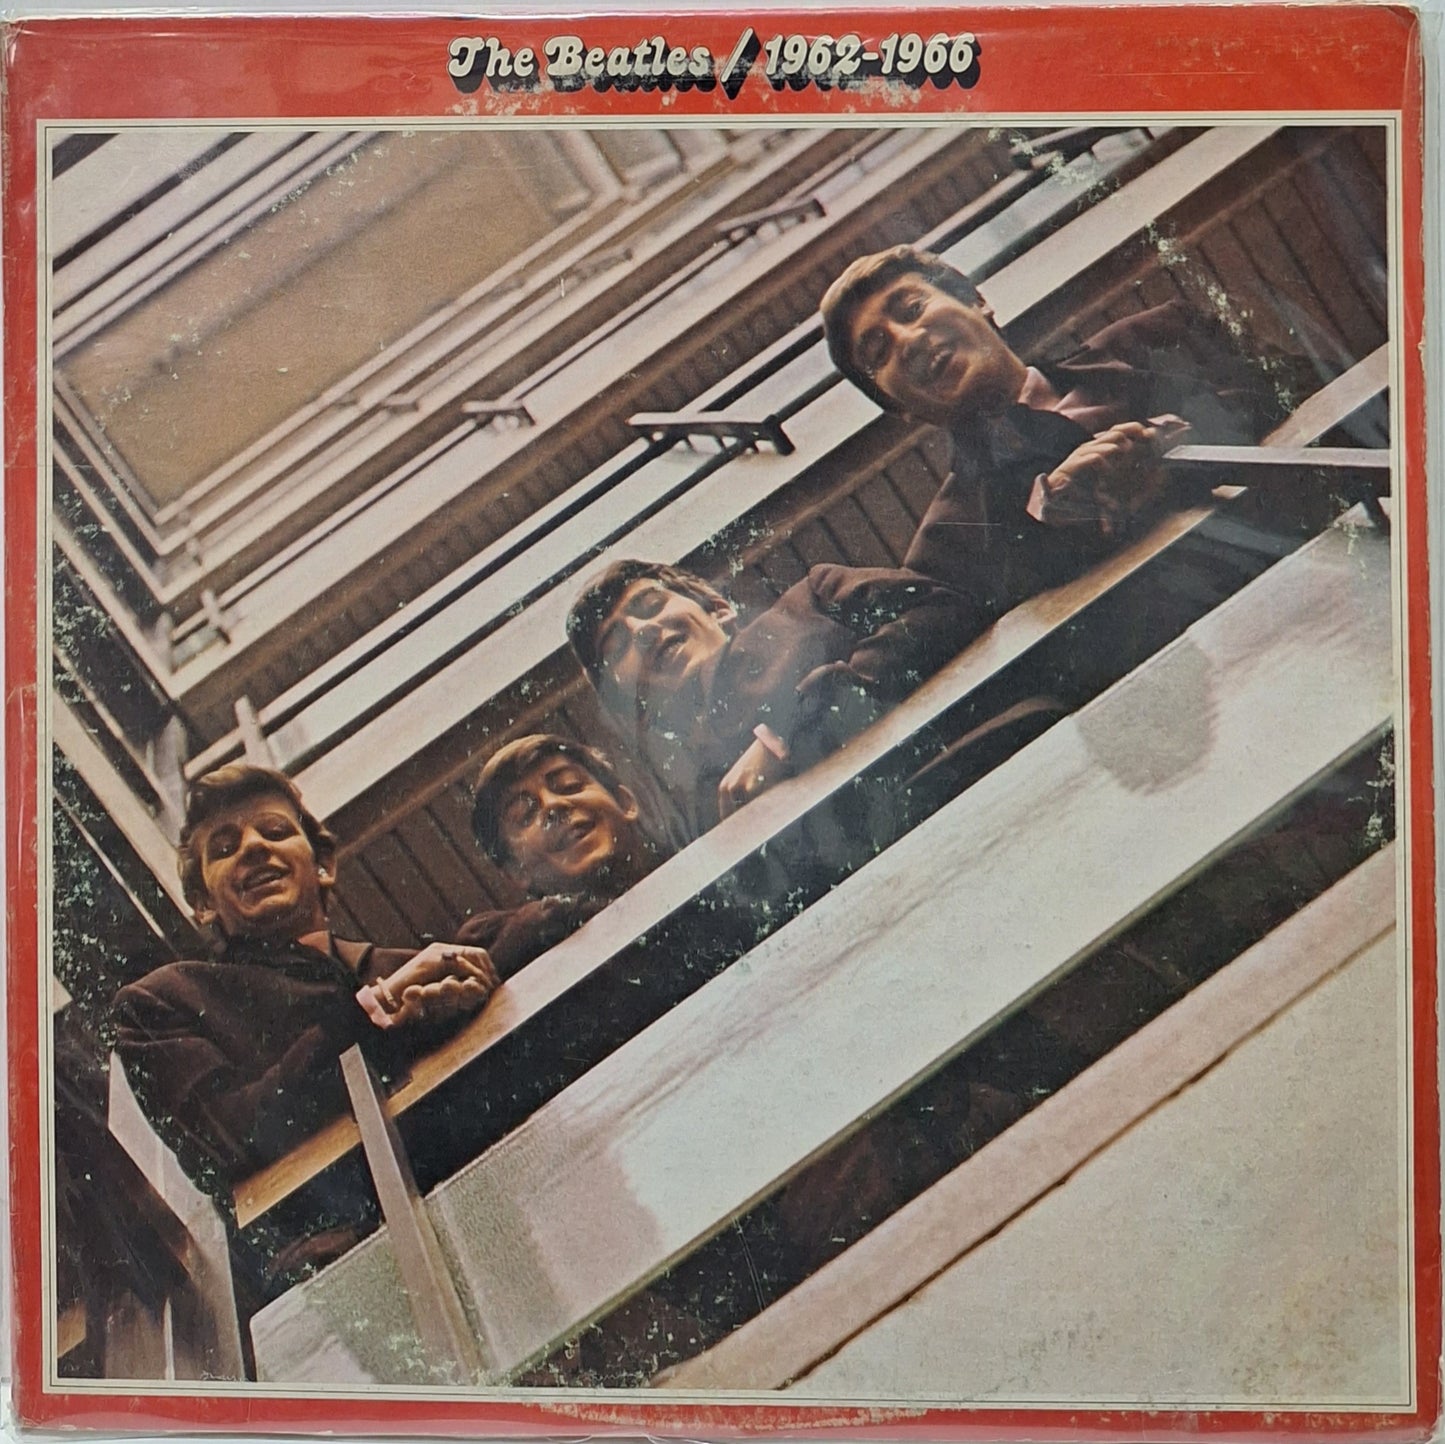 THE BEATLES - 1962 1966  2 LPS